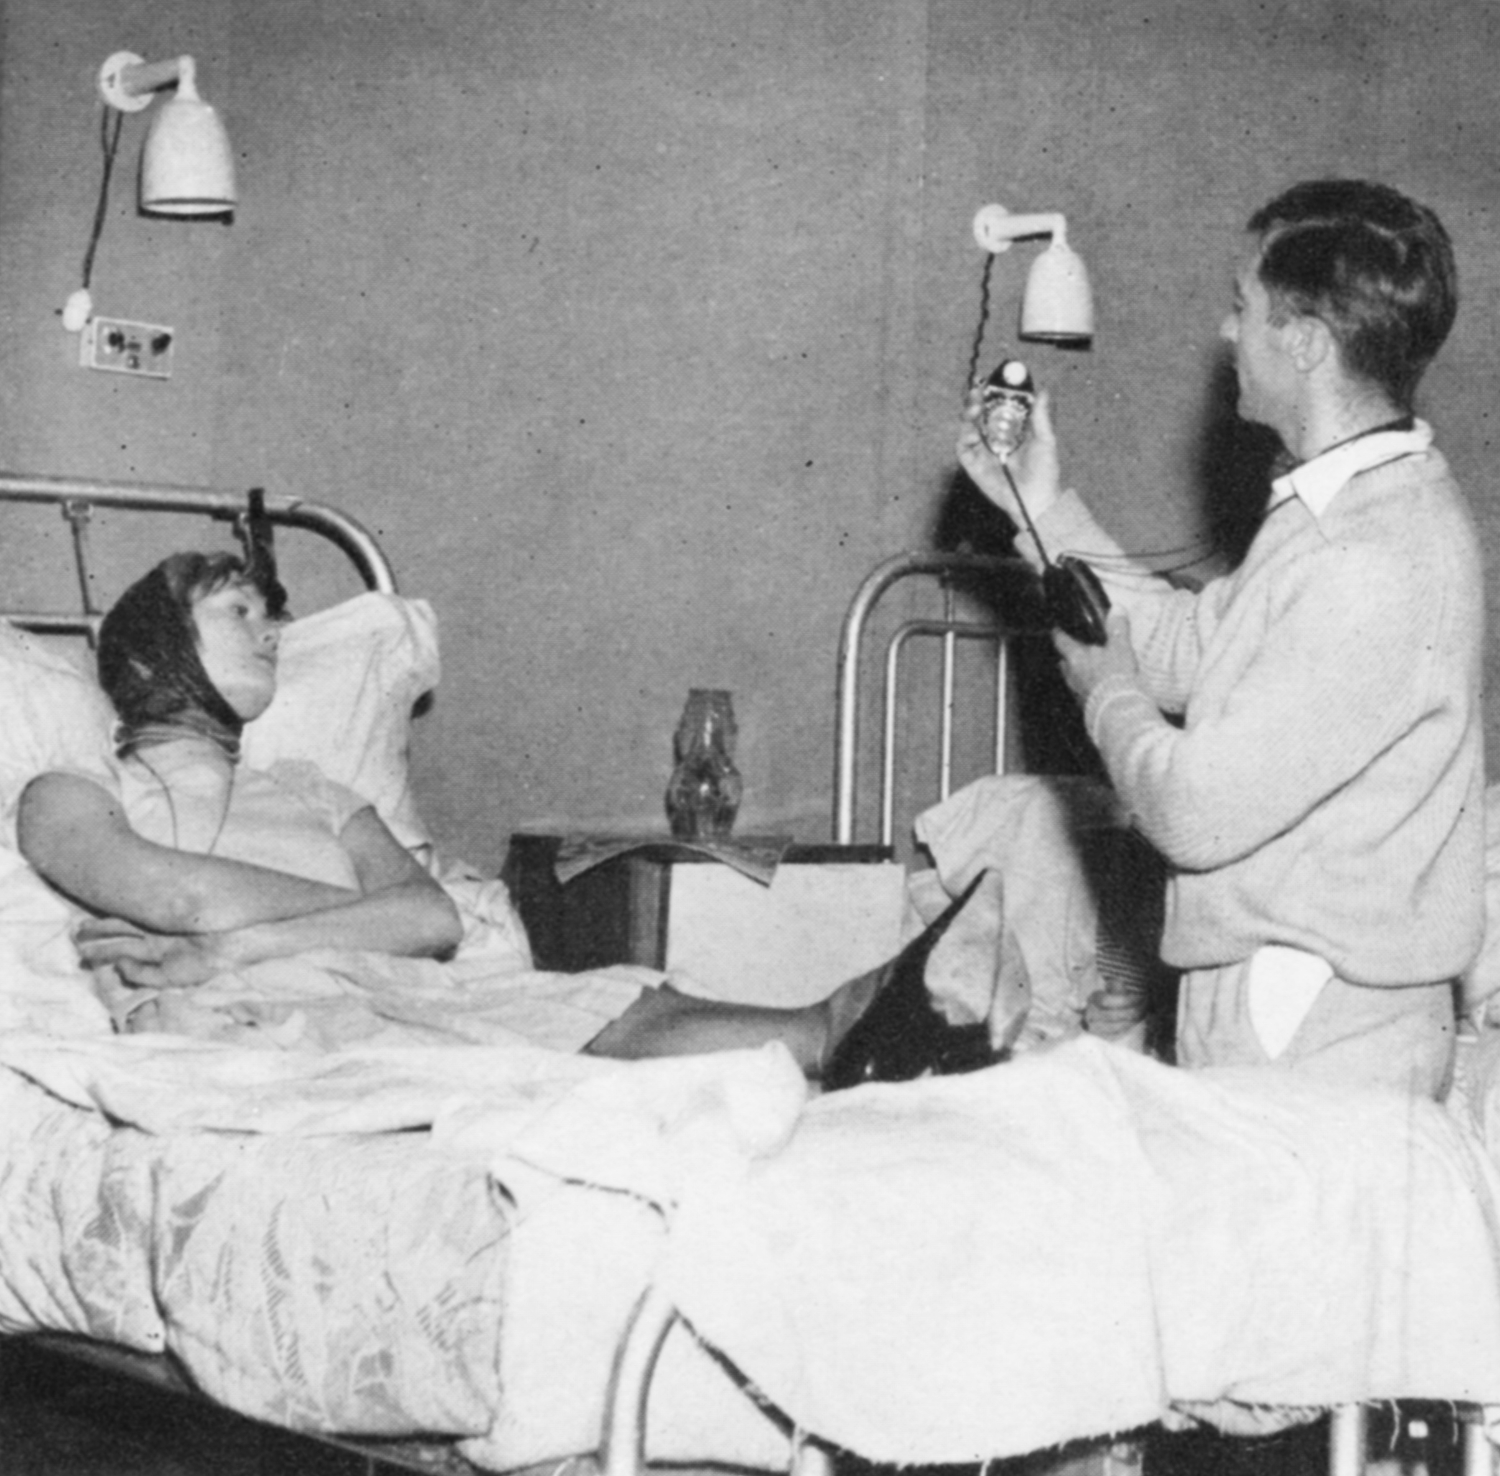 A man operates a lighting meter above a woman in a hospital bed